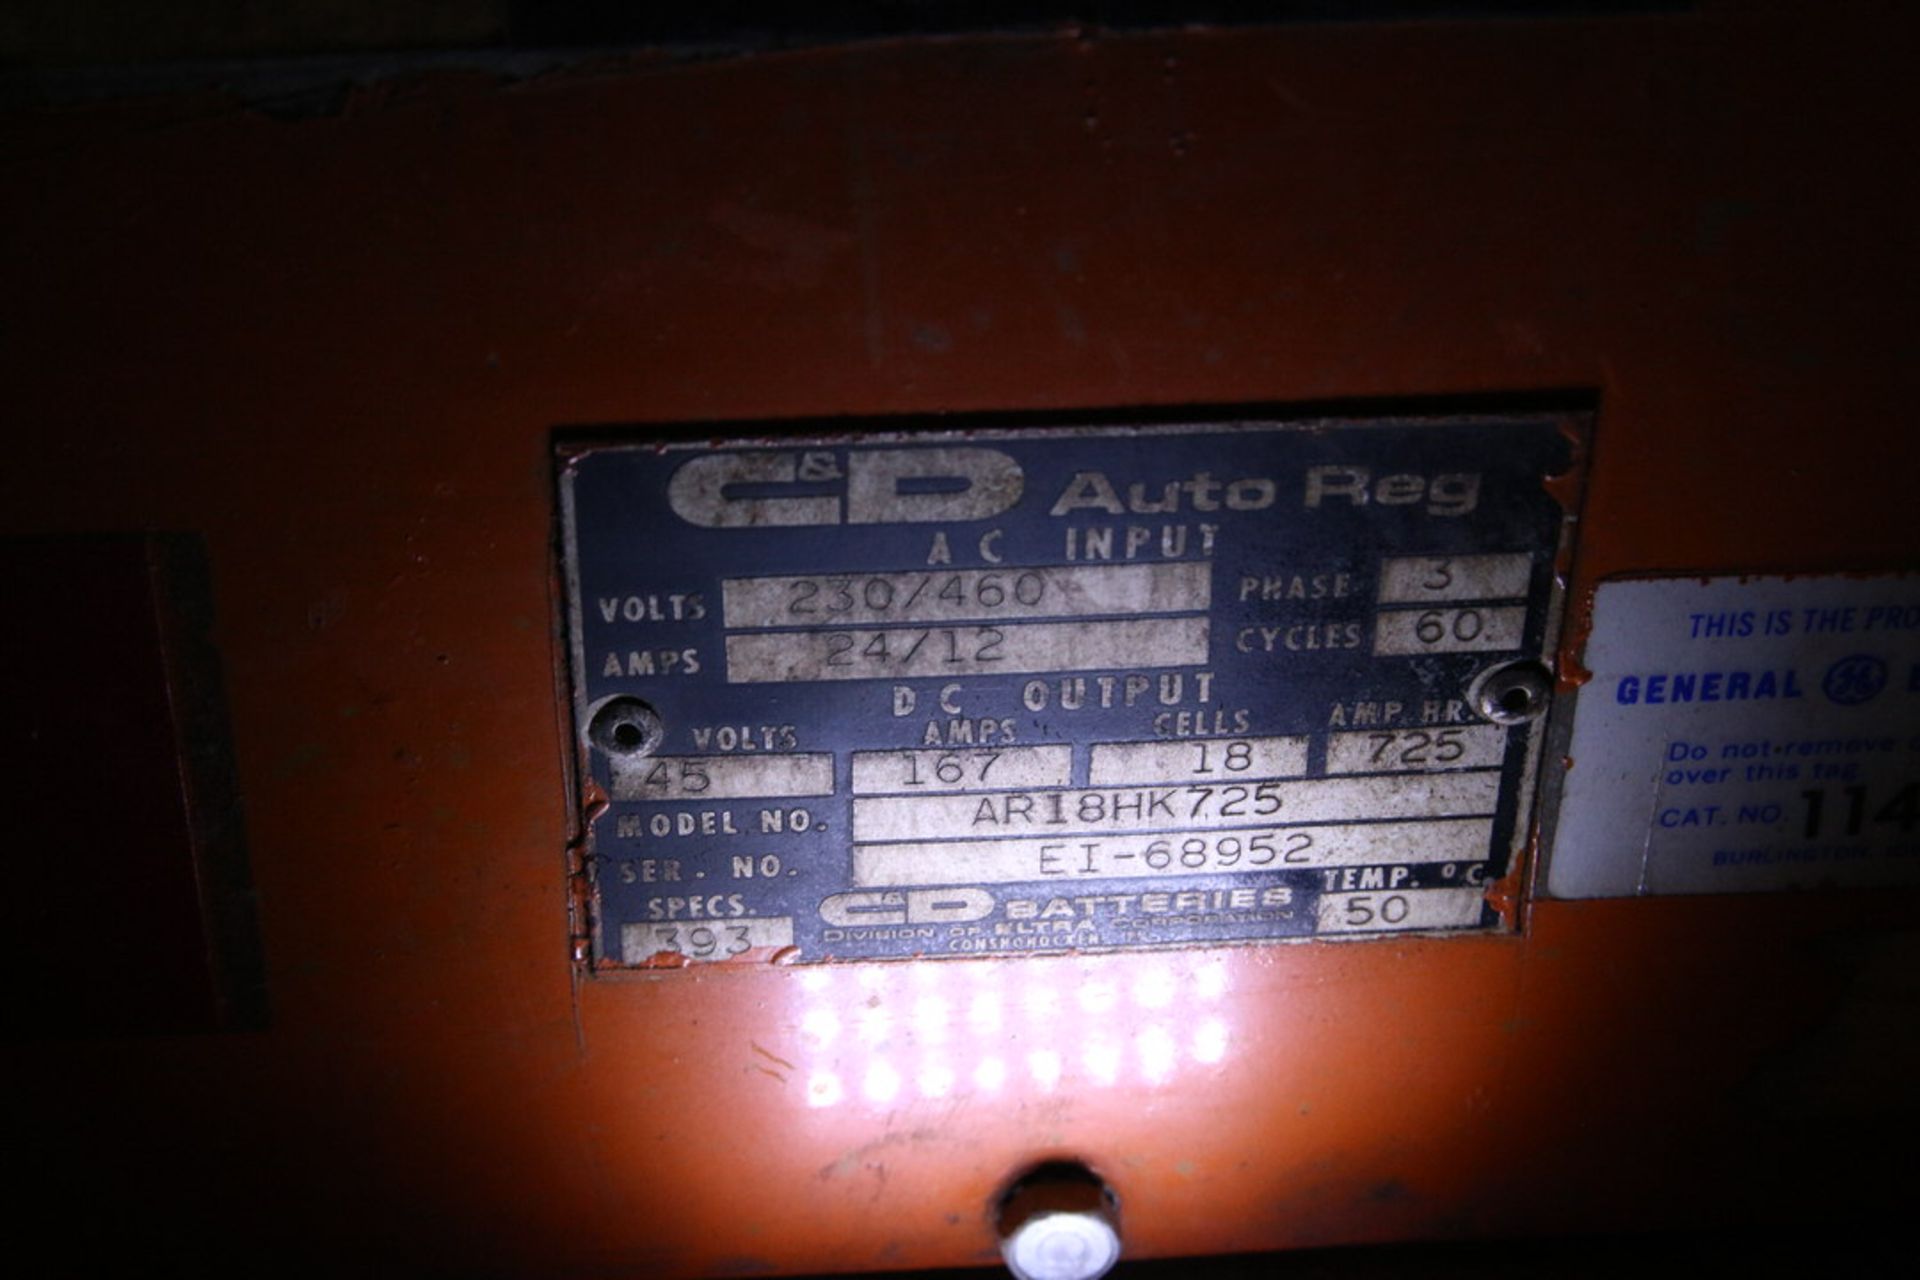 Auto Reg AR18HK725 Charger - Image 2 of 2